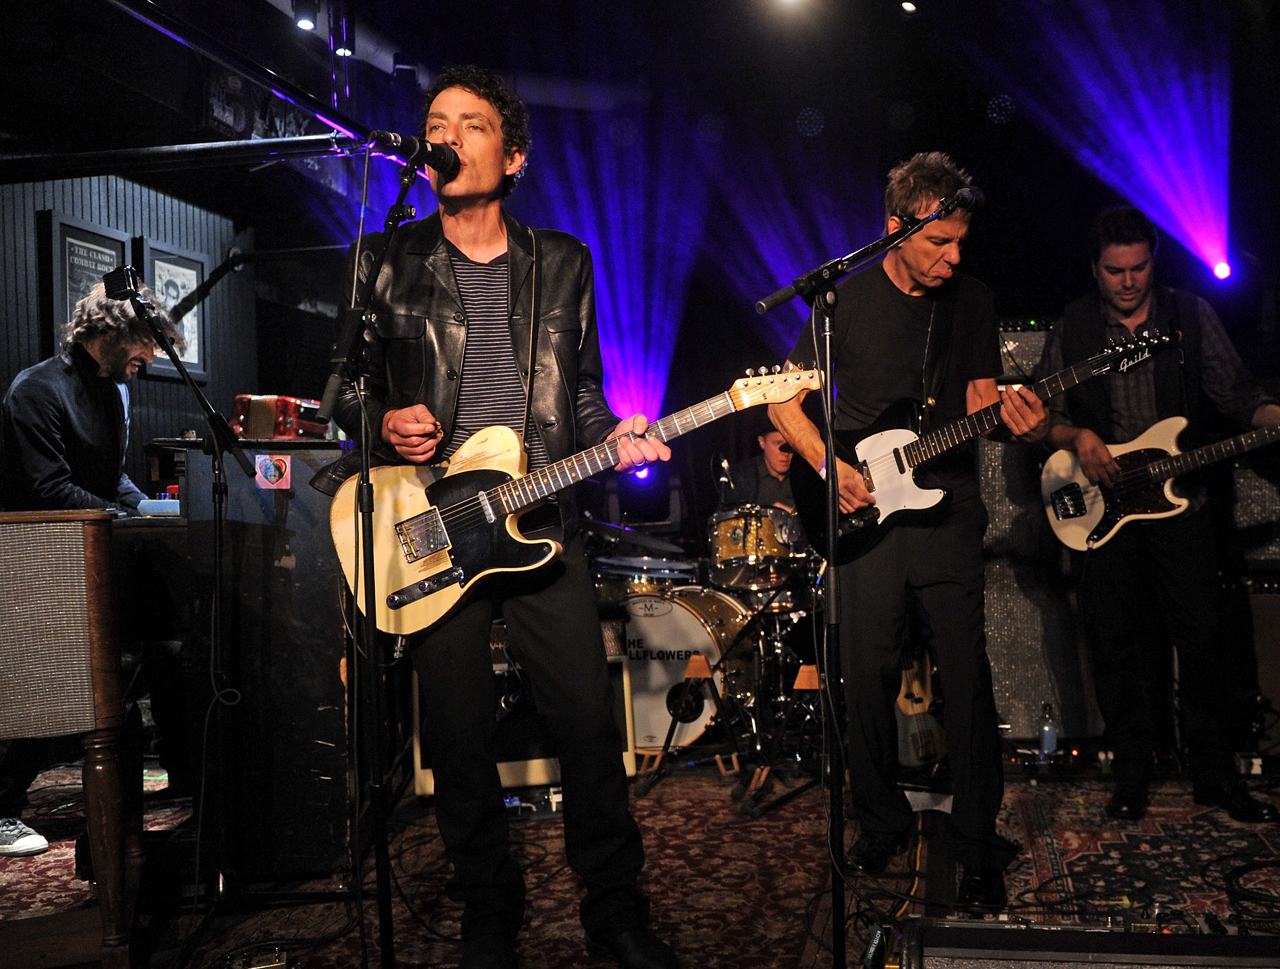 The Wallflowers to open for Eric Clapton on tour CBS News